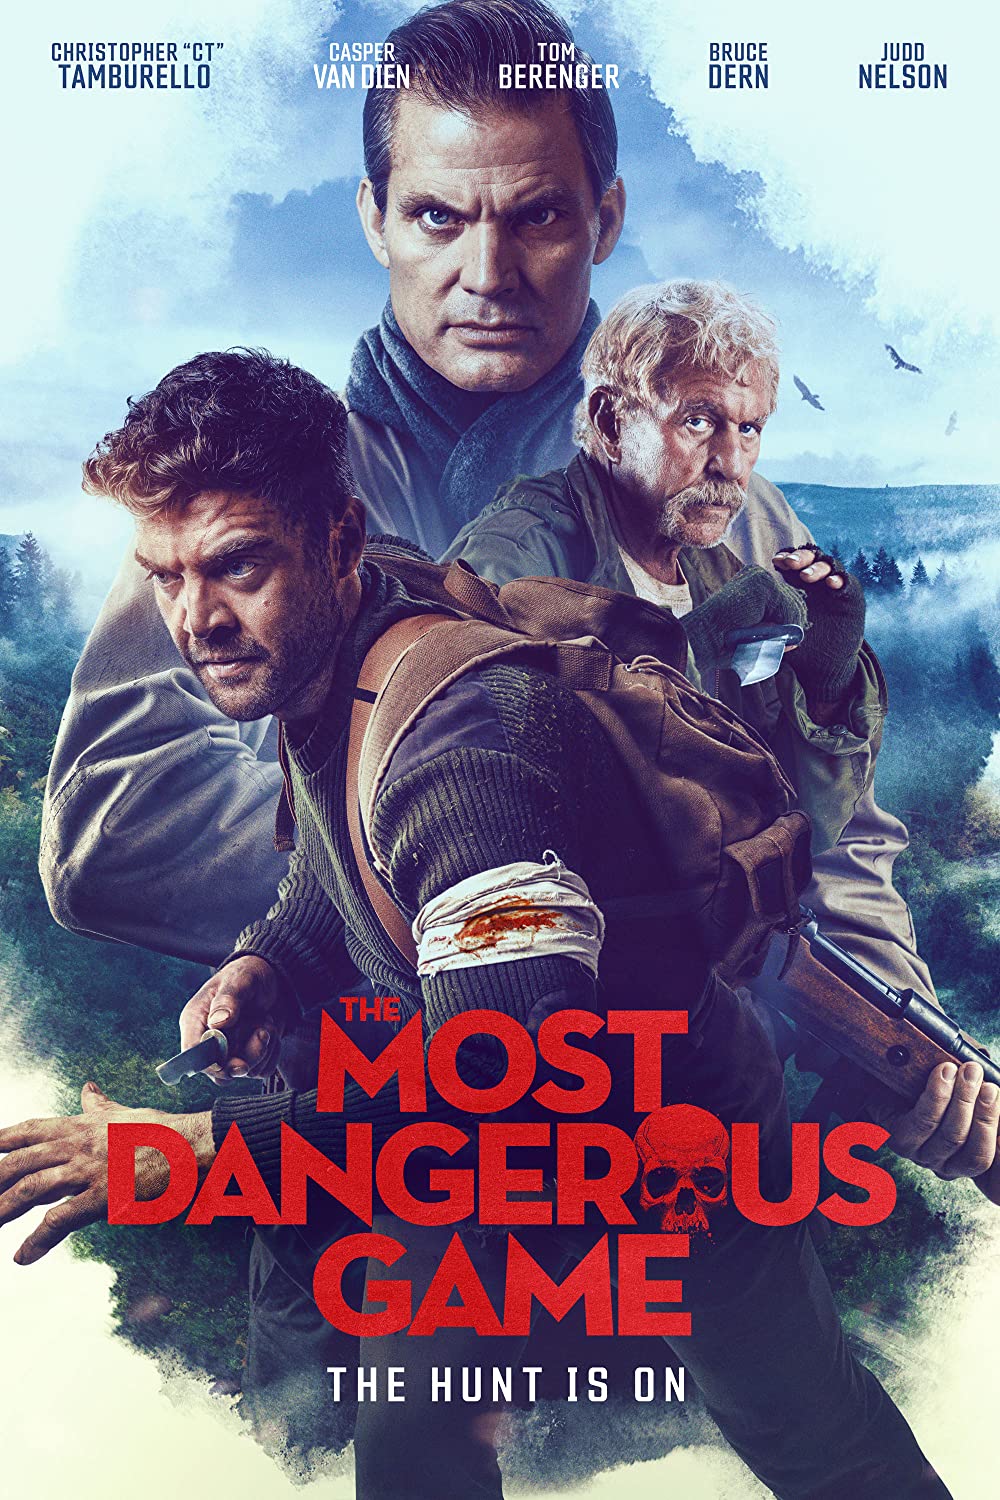 The Most Dangerous Game 2022 English 1080p HDRip ESub 1.4GB Download